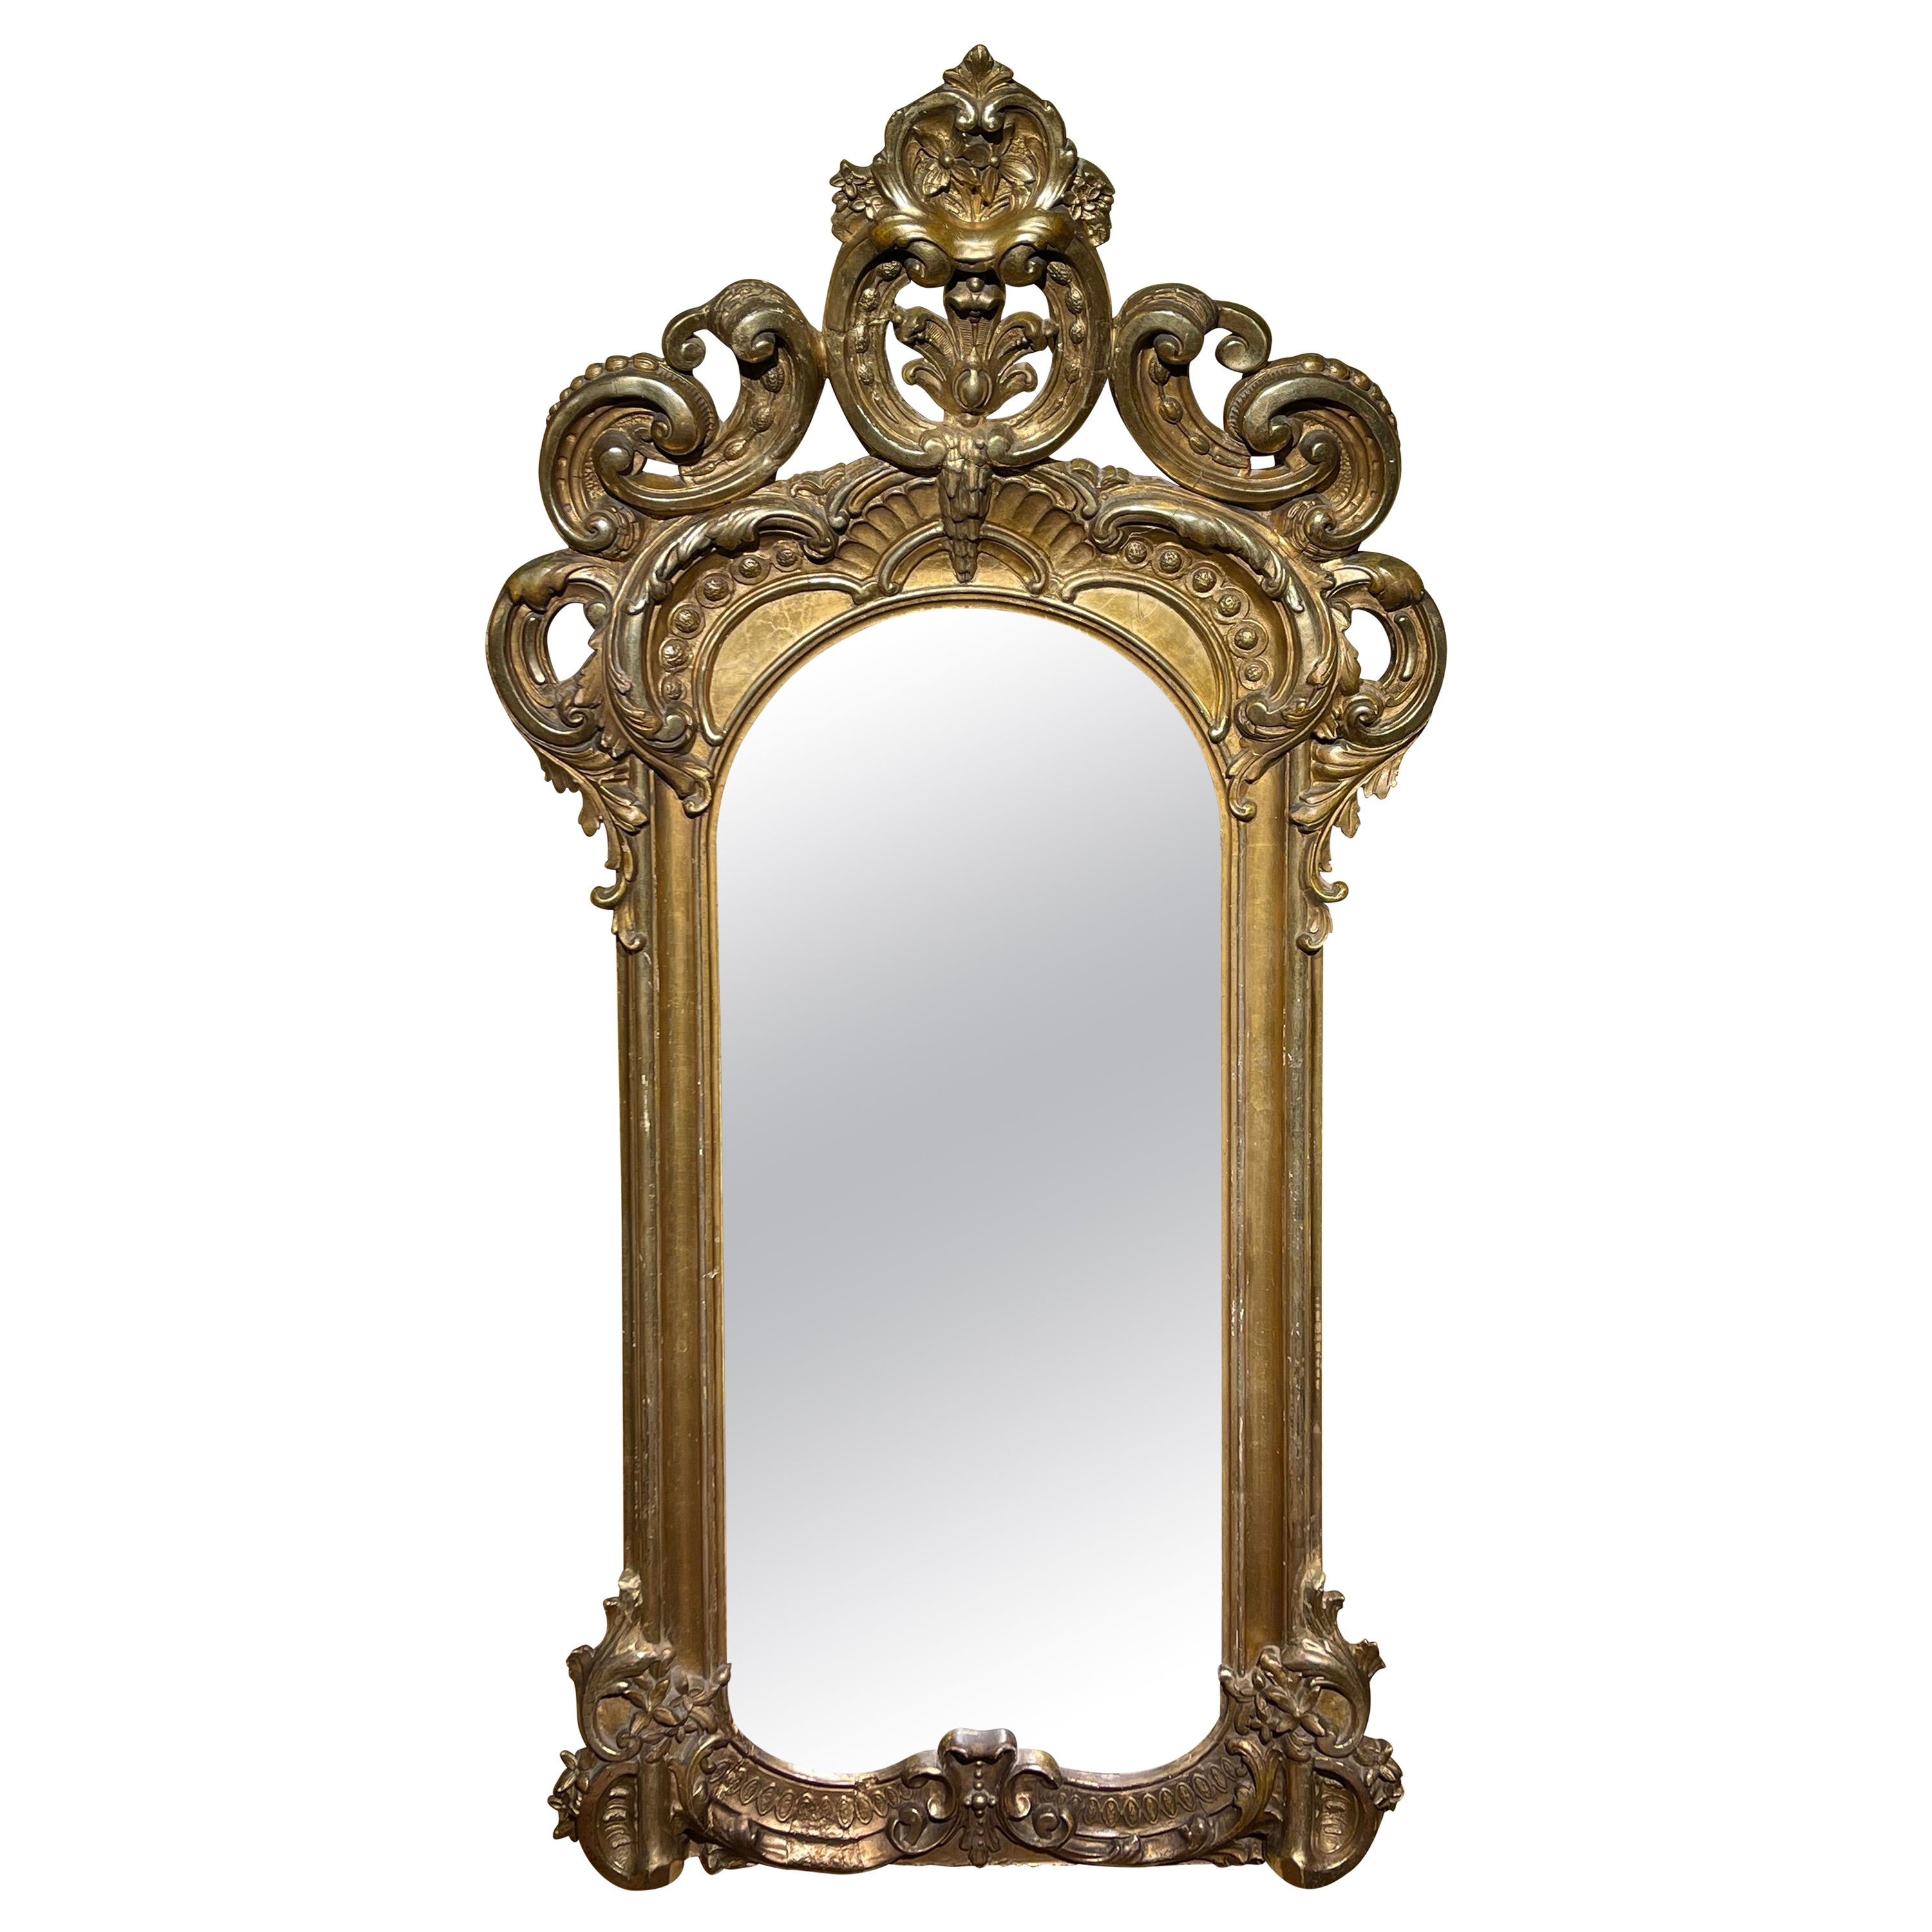 Stately Gilded Parlor Wall Mirror, Napoleon III